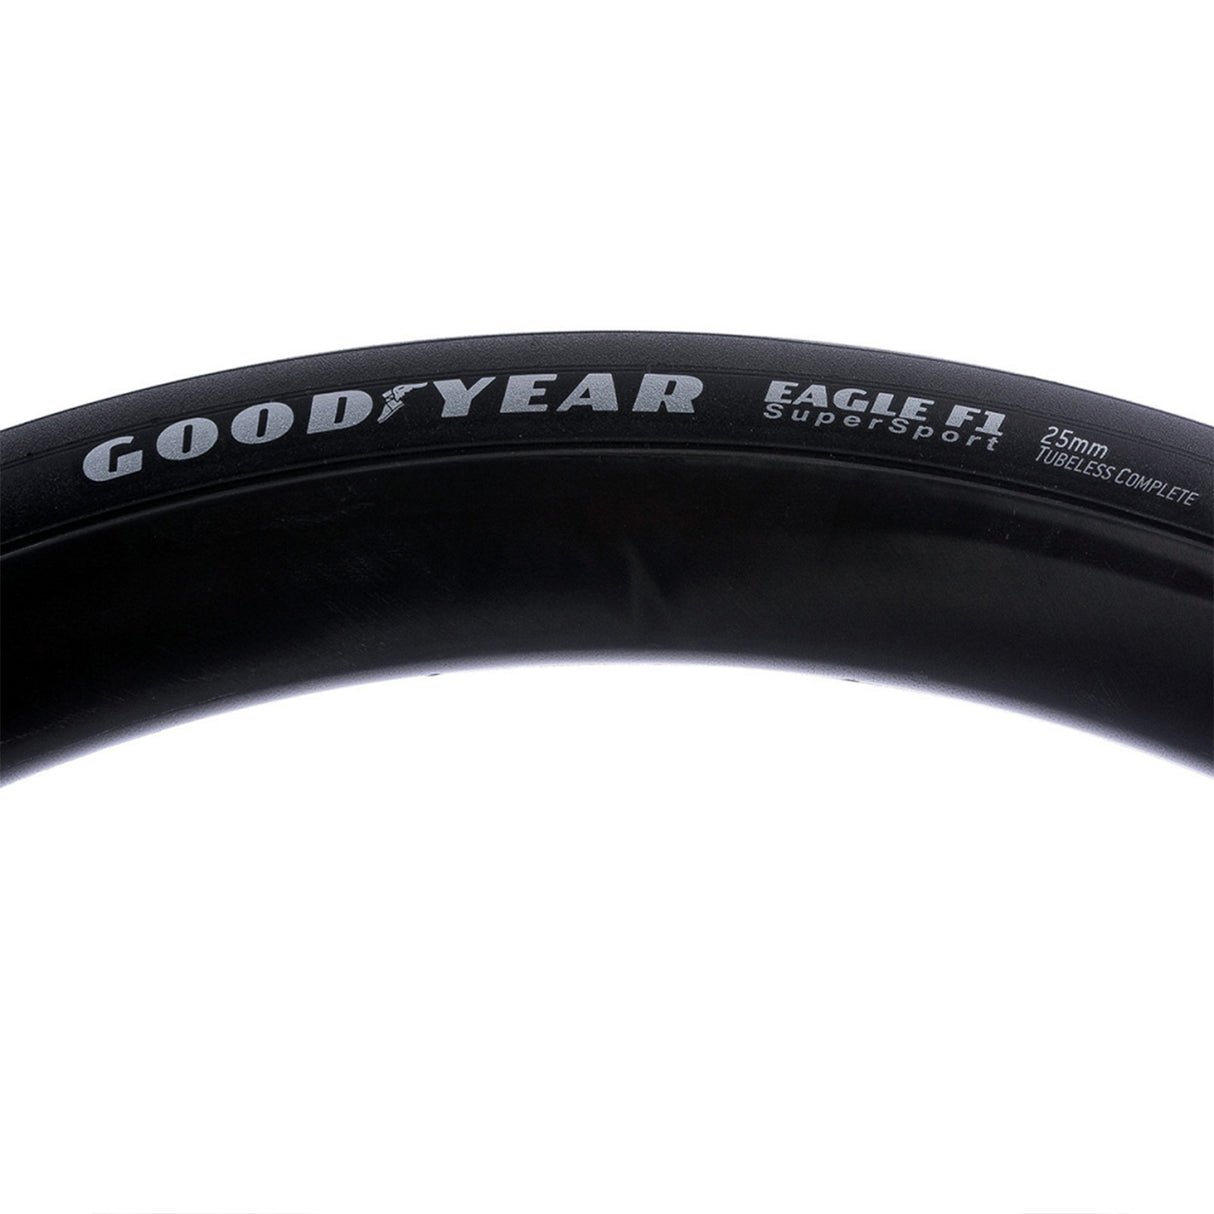 Goodyear Eagle F1 Super Sport Tubeless Complete 700c Tyre